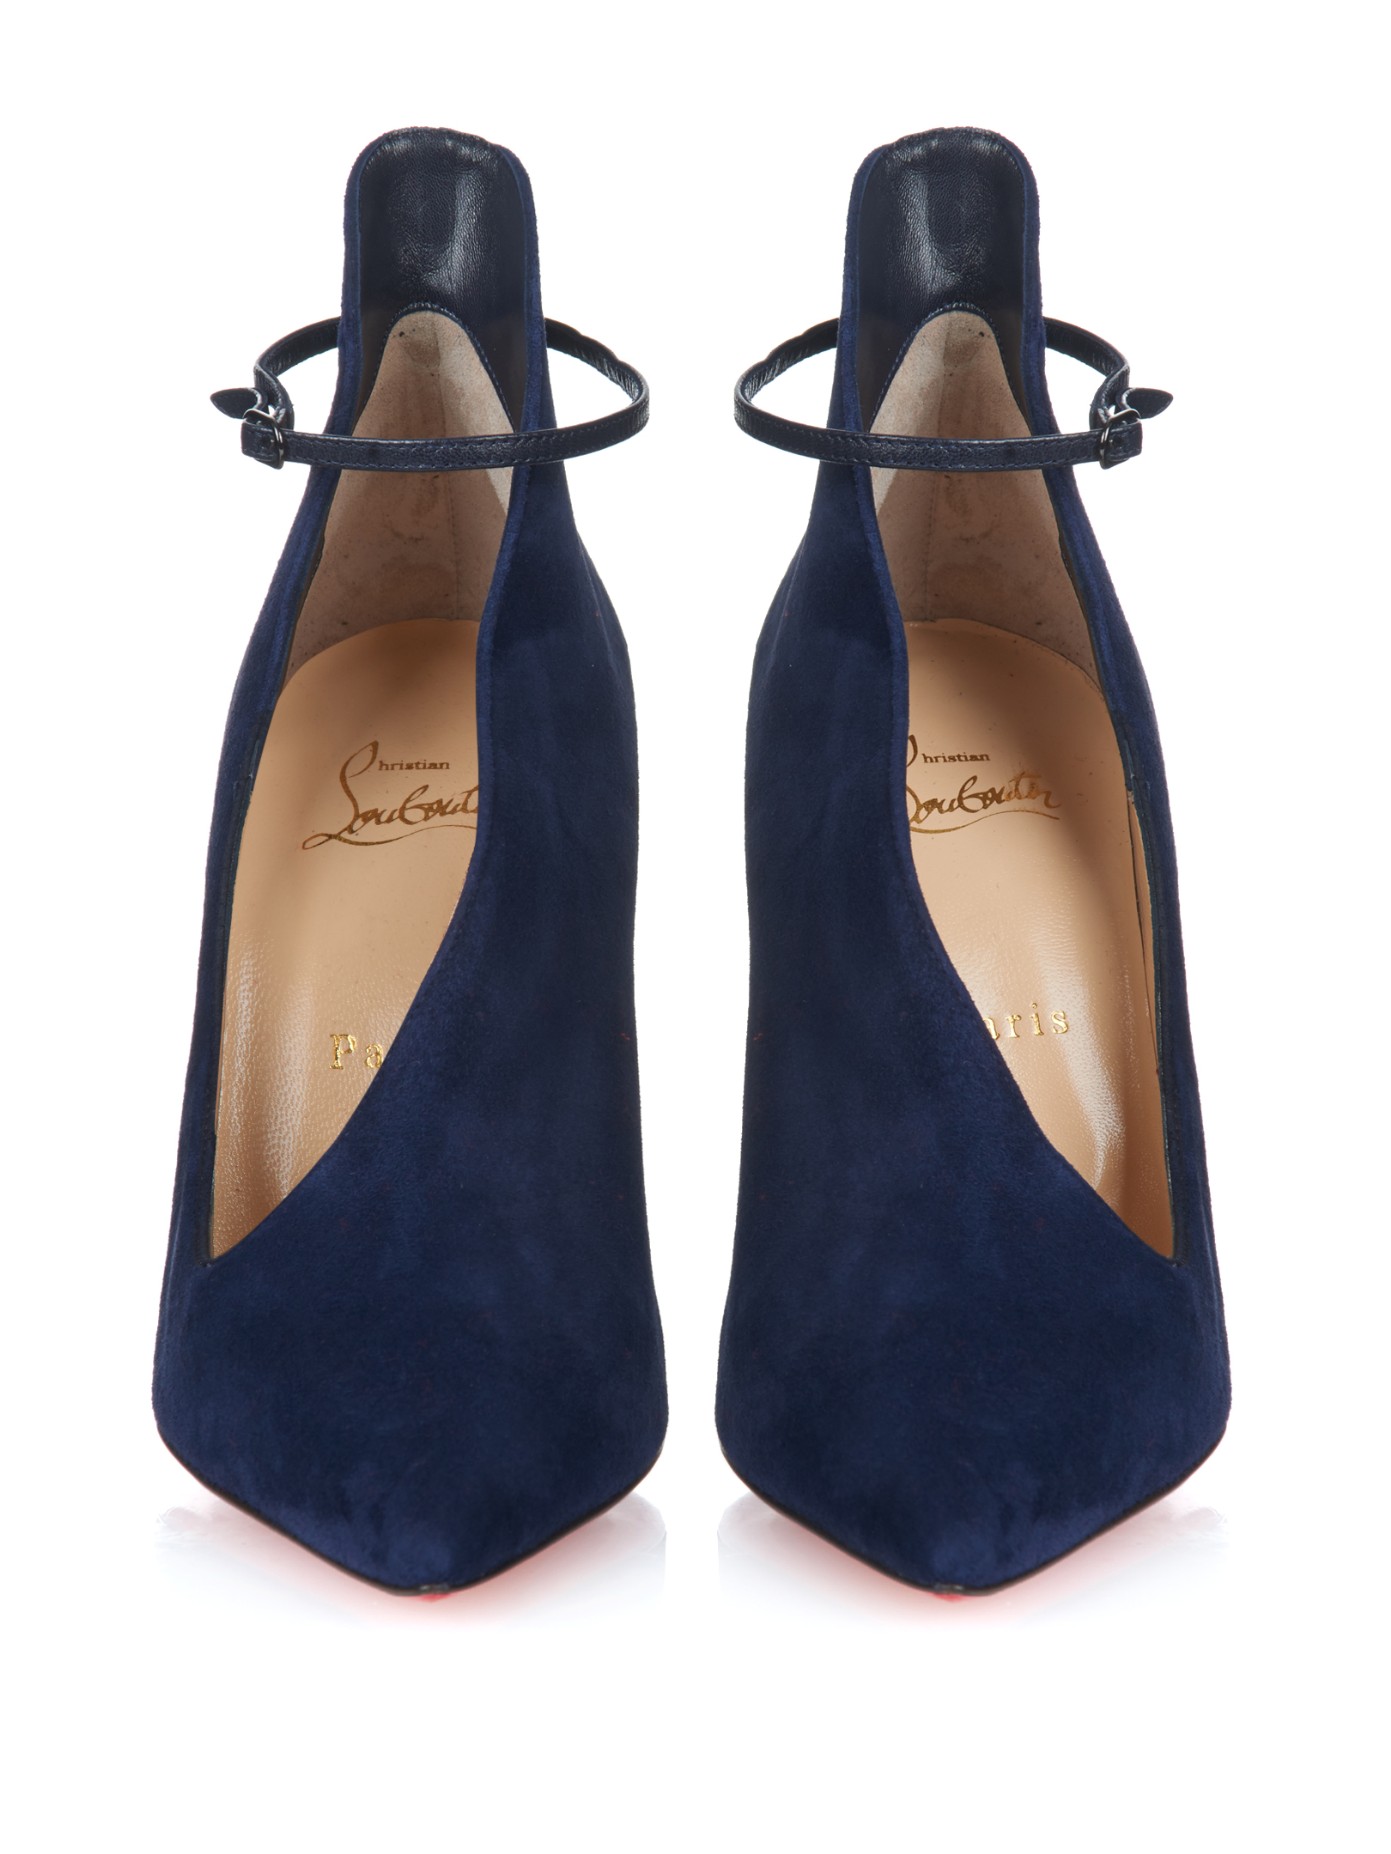 christian-louboutin-100mm-ankle-strap-suede-pumps-2